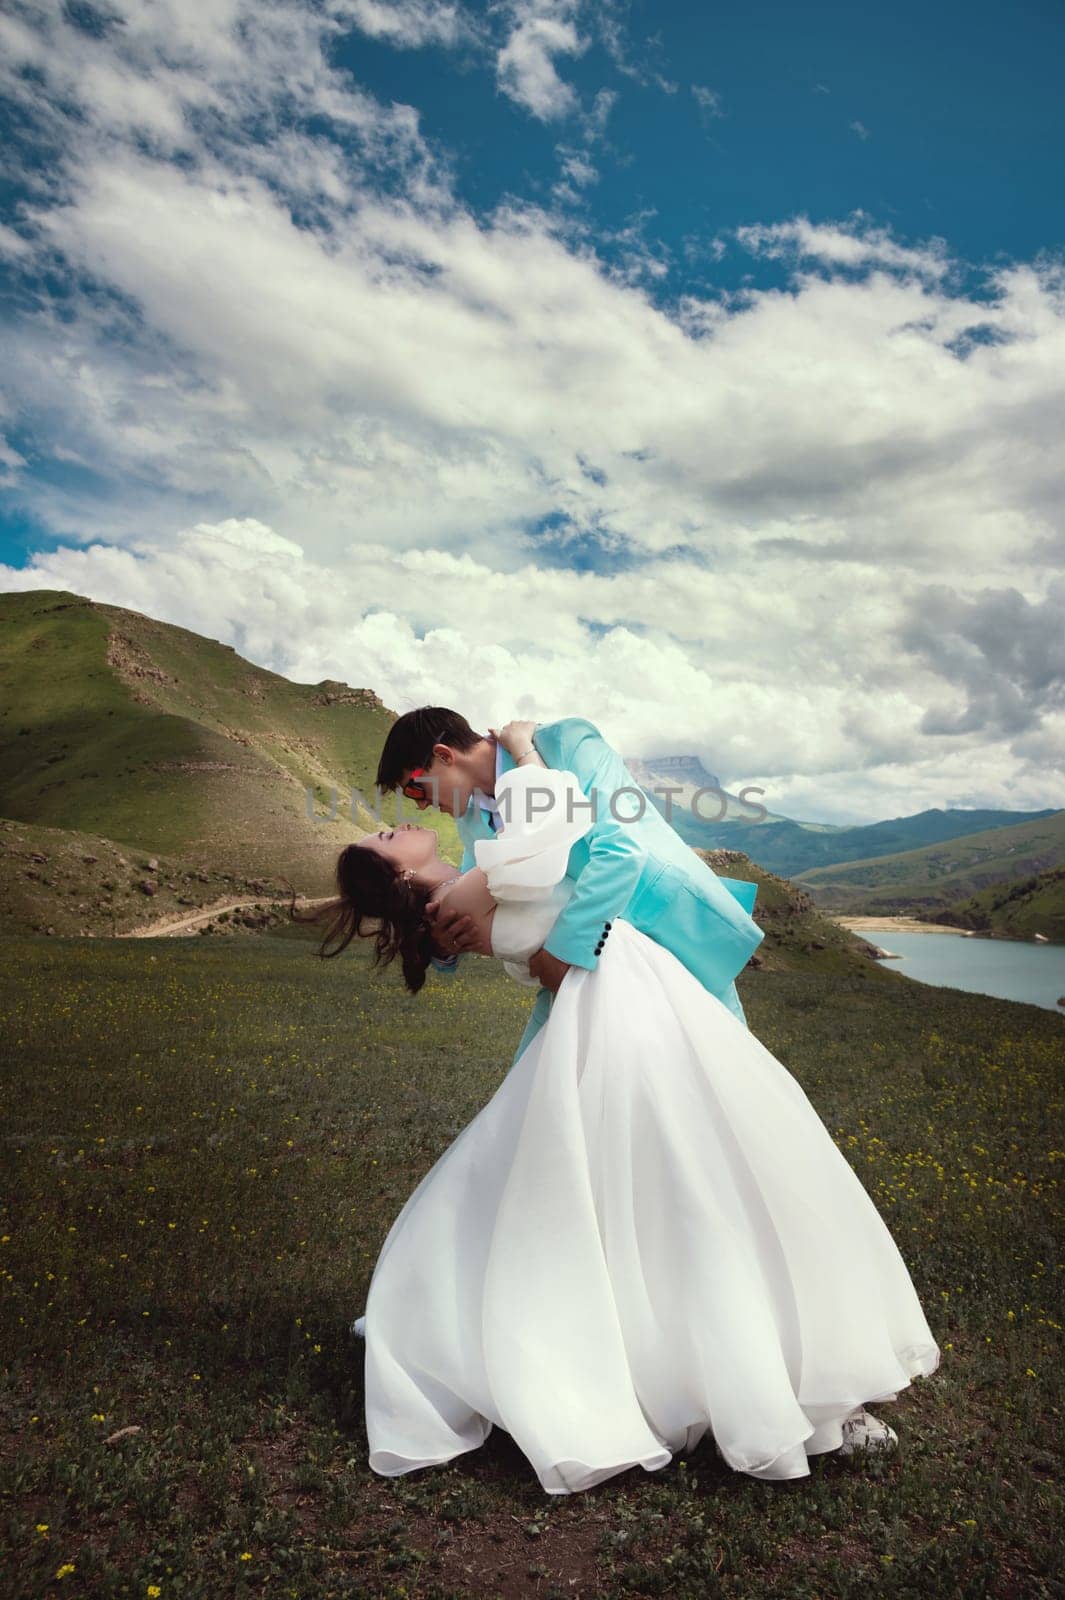 Love, wedding and married couple kissing by the lake outdoors in honor of their romantic marriage. Water, summer, mountains or a kiss.